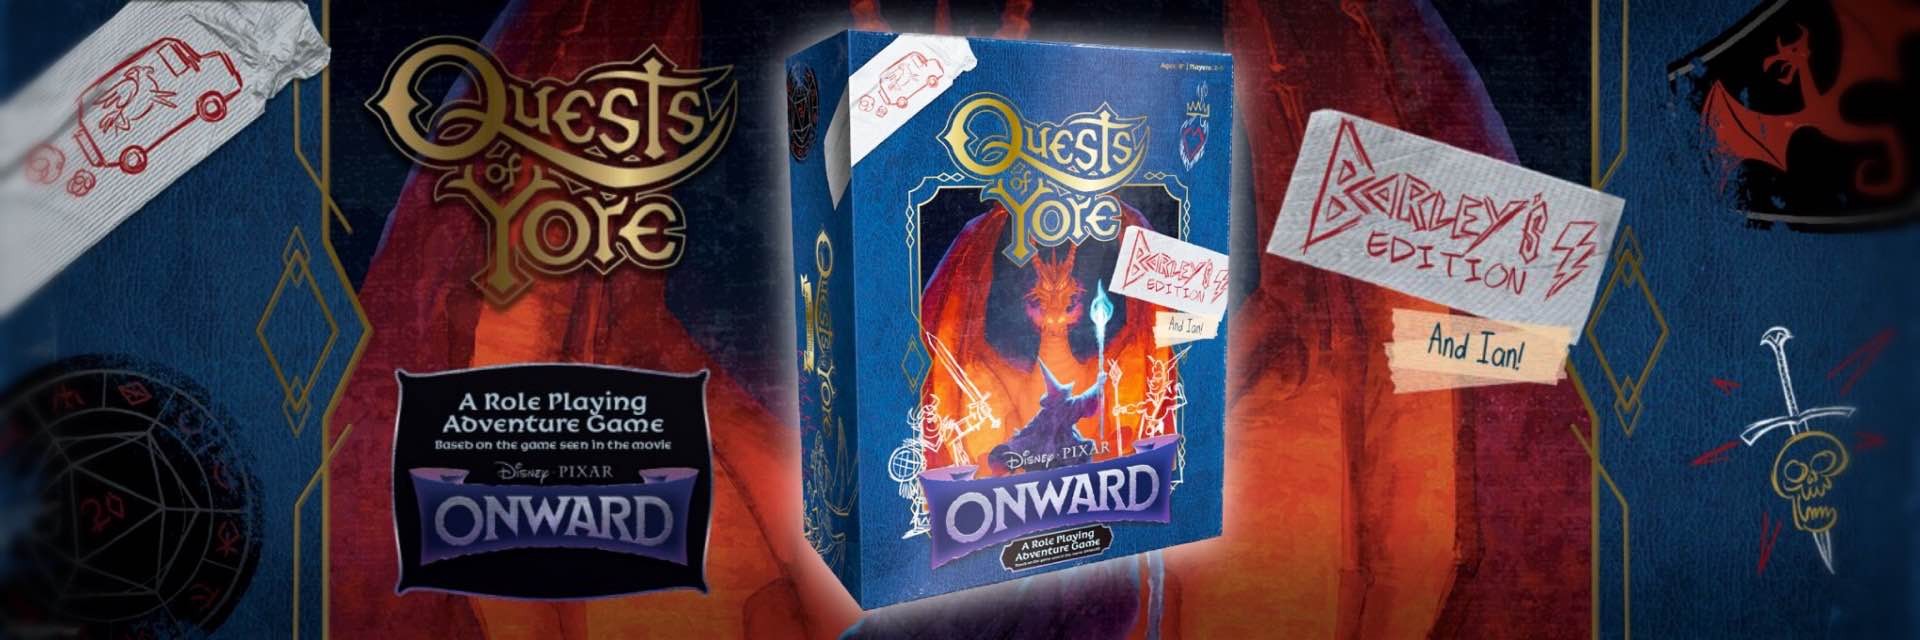 Quests of Yore: Barley's Edition from Disney/Pixar's Onward film. ($47)